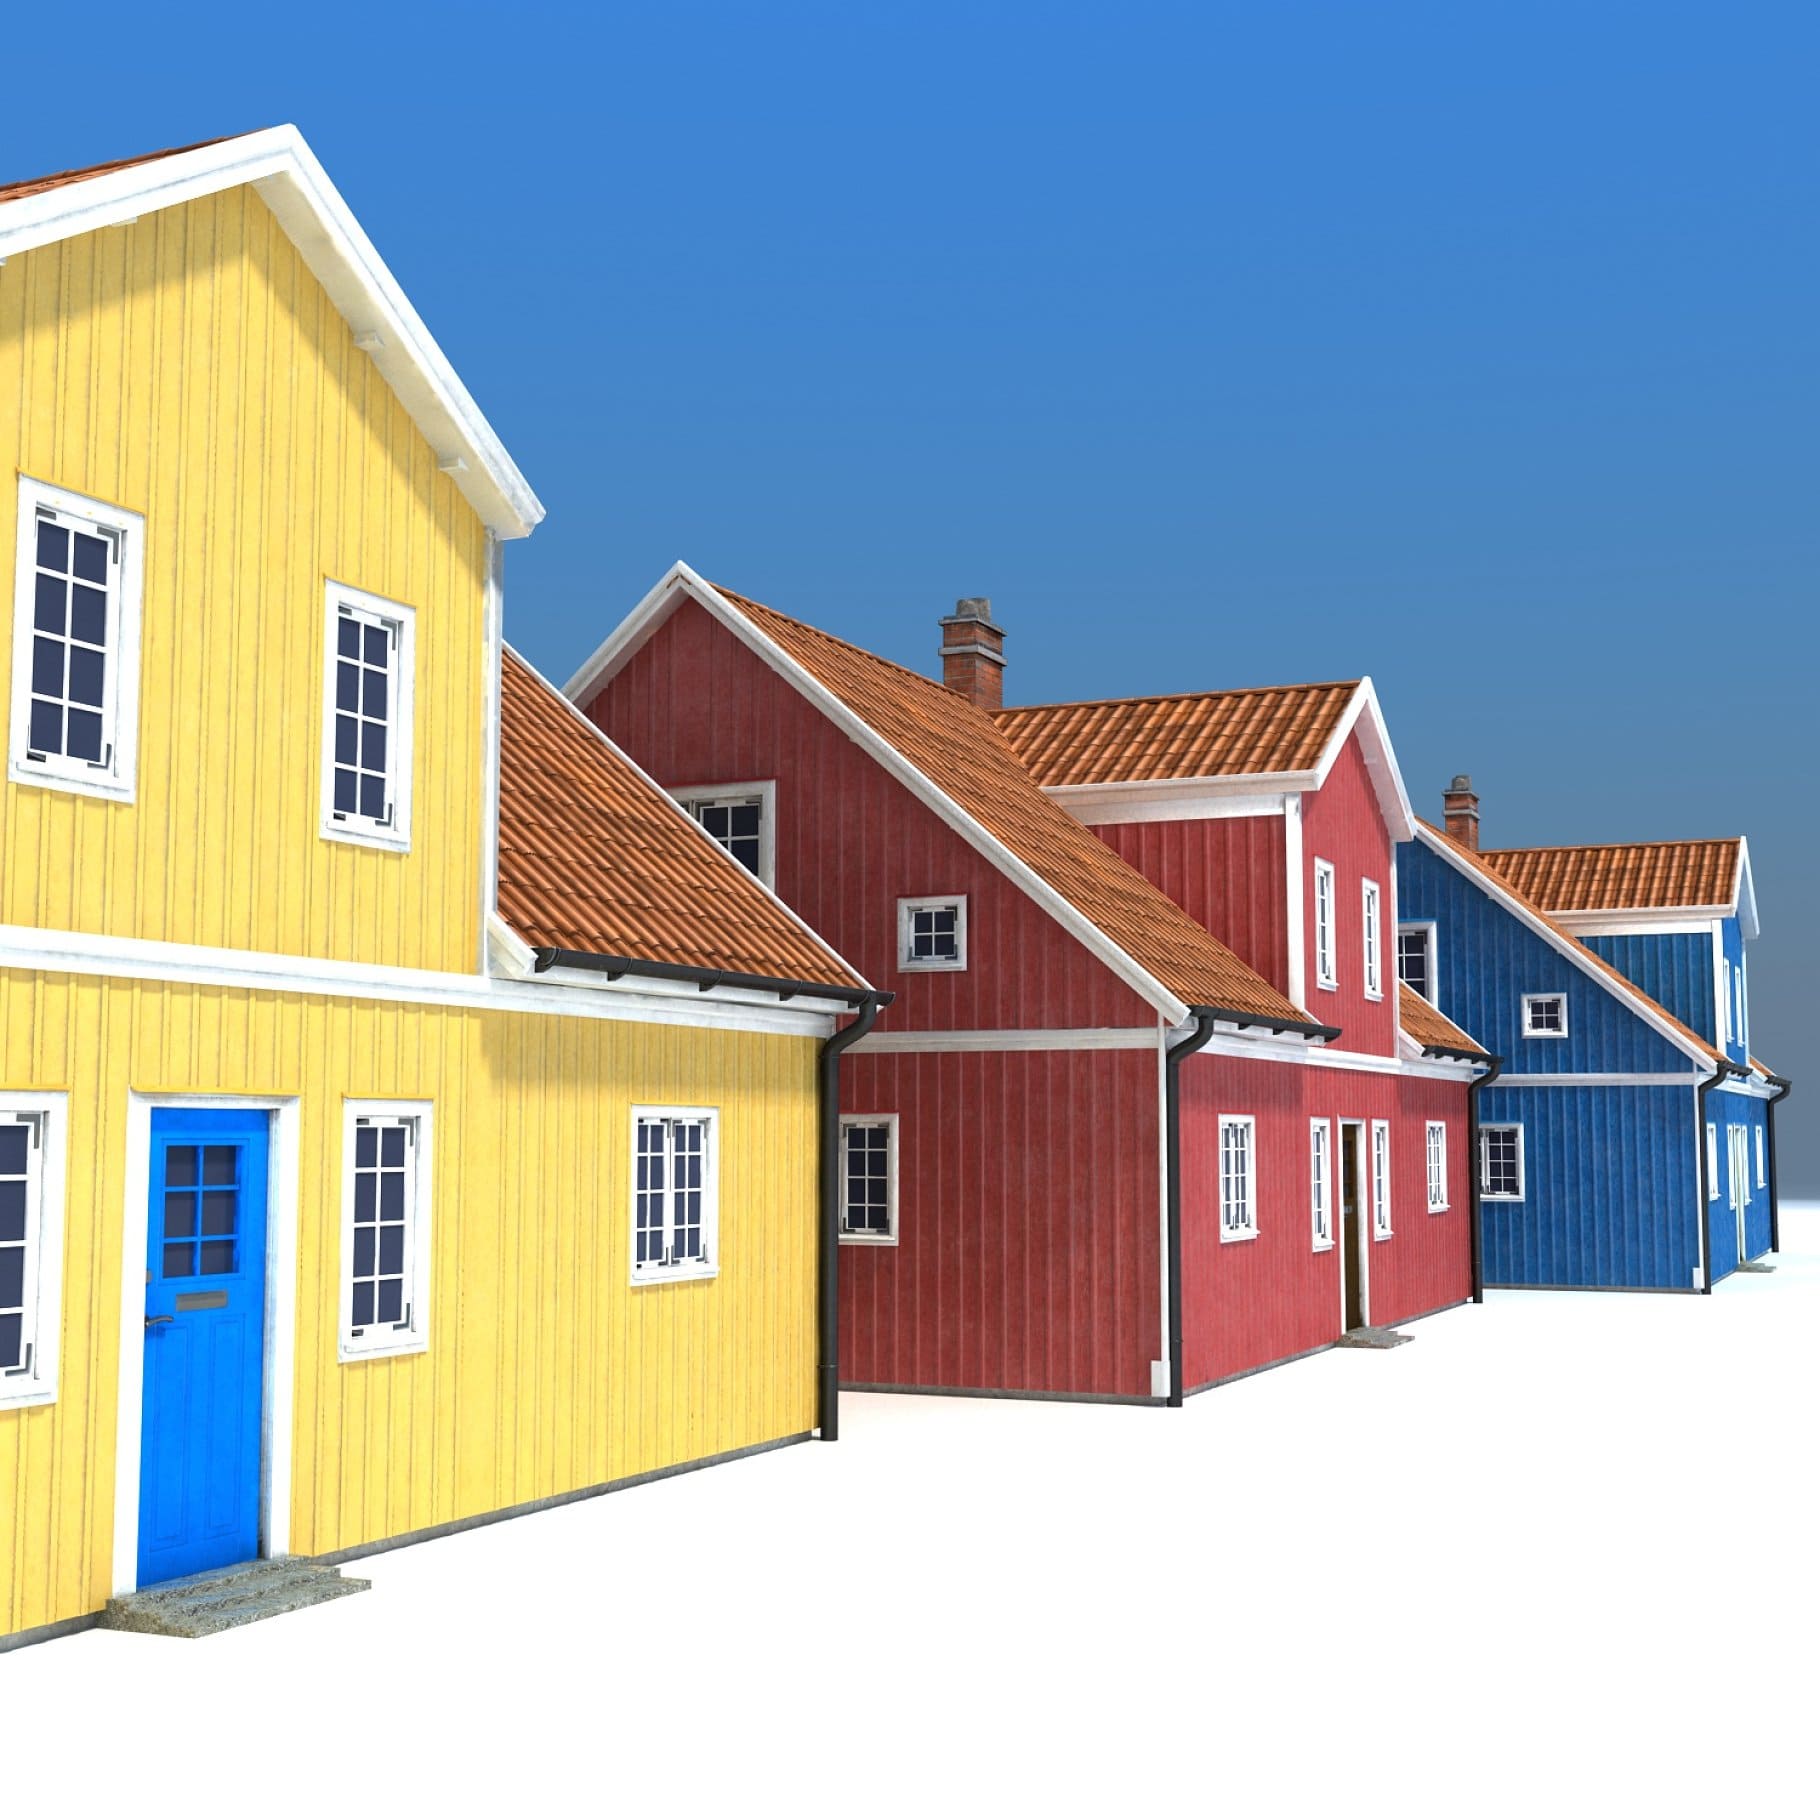 Three colored houses on the background of a winter landscape.